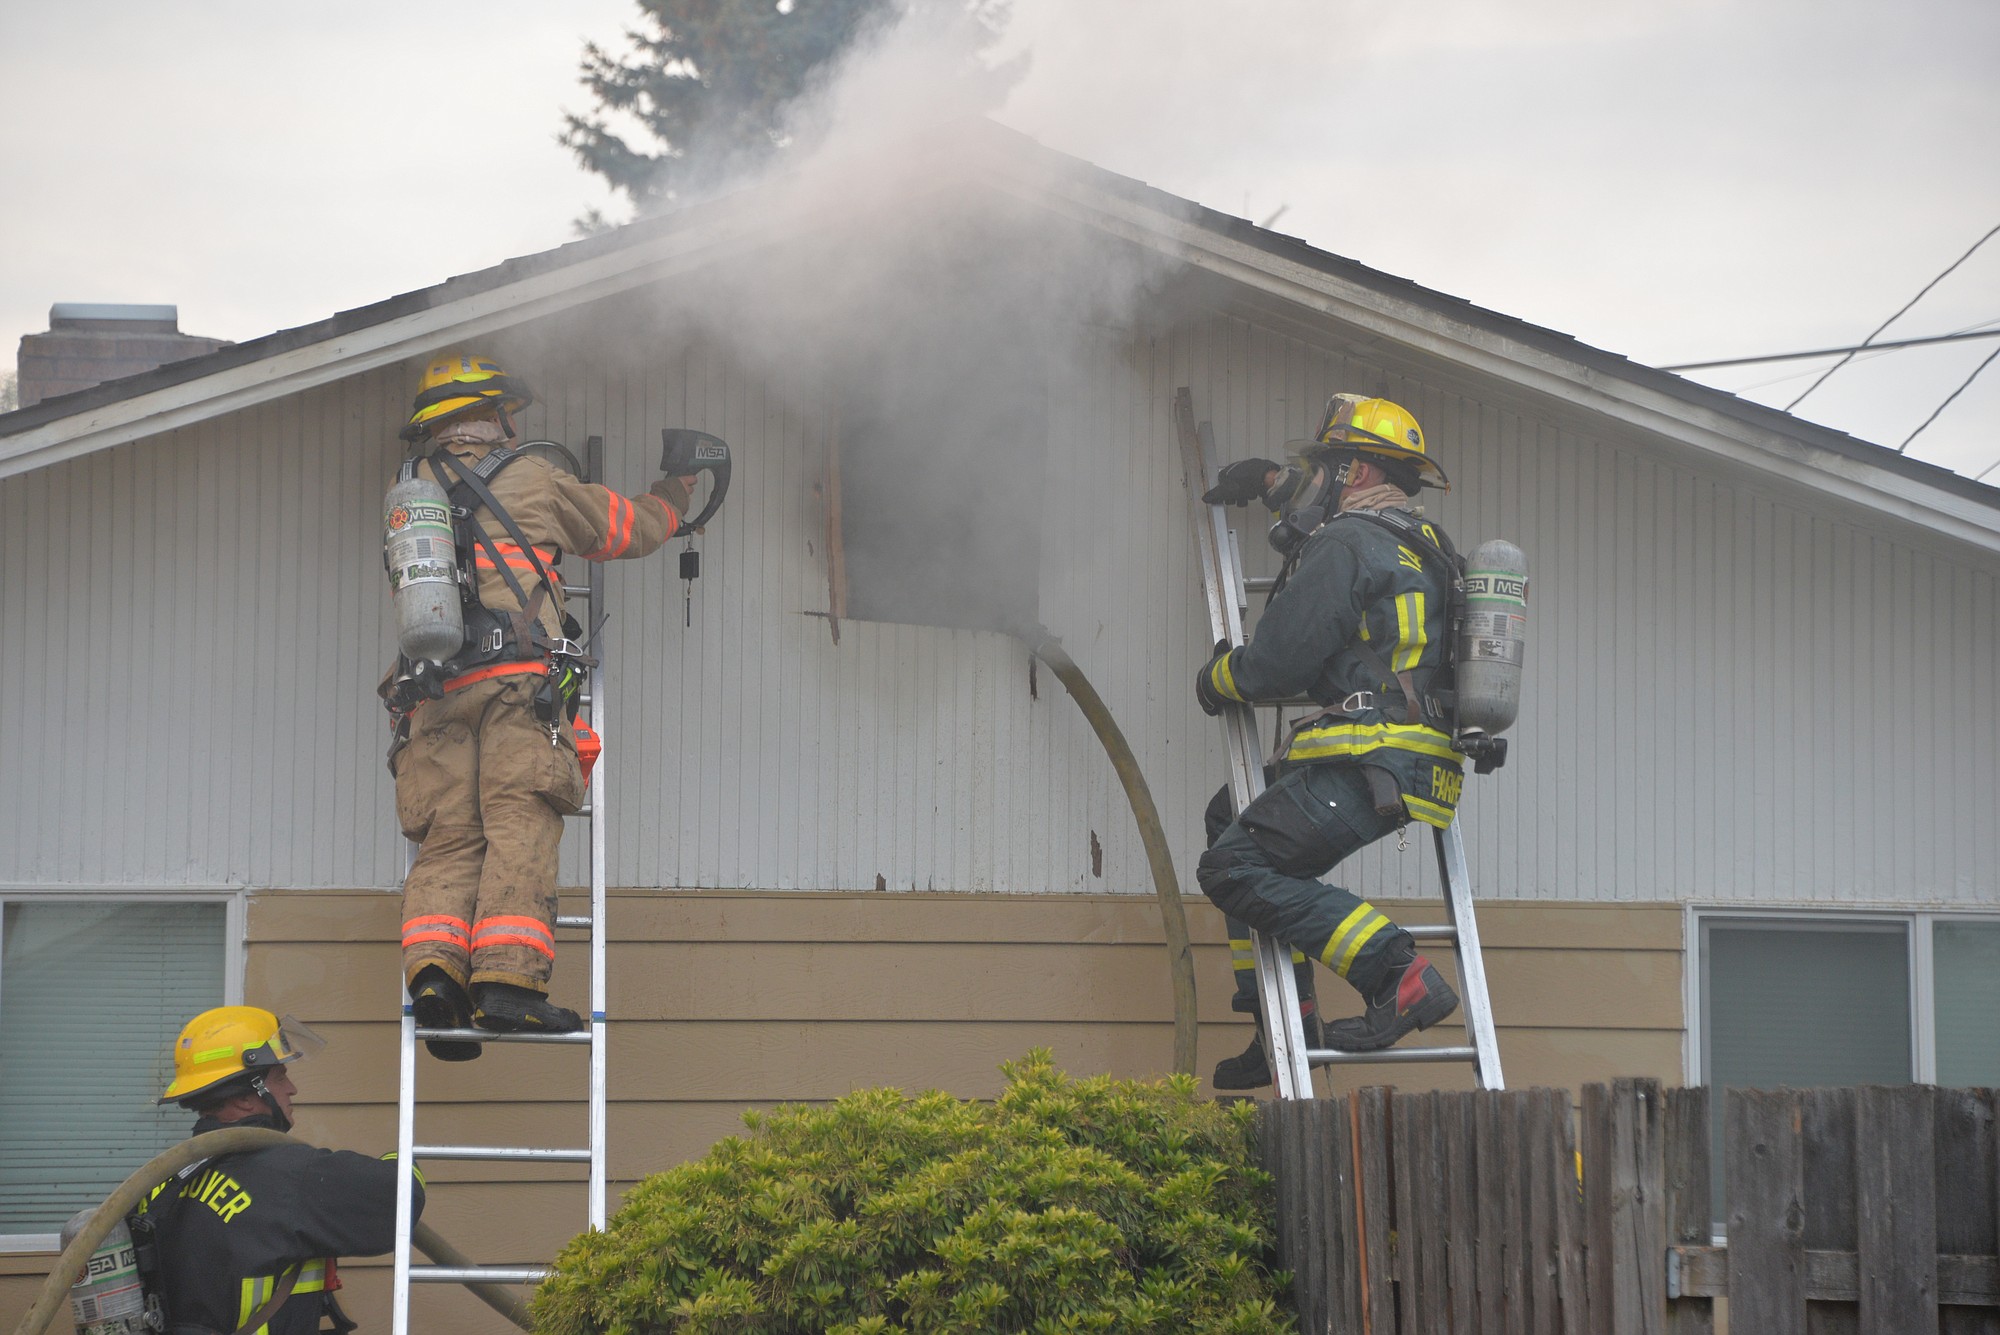 Firefighters battle an attic fire in a home at 307 S.E. 105th Ave.